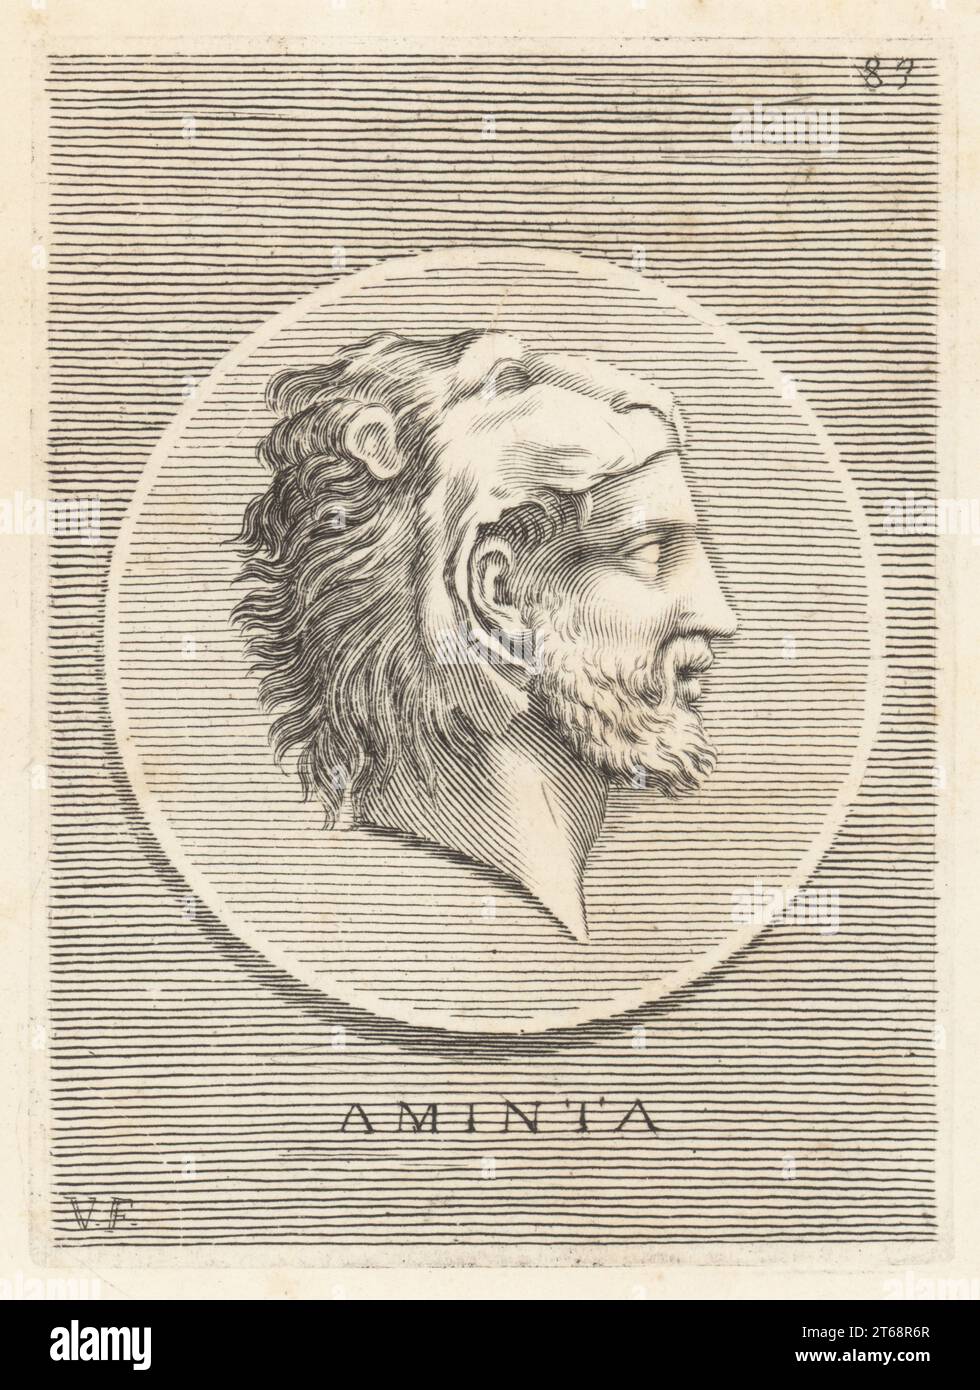 King Amyntas I of Macedon wearing a lionskin like the Greek hero Heracles. A vassal of Darius I from 511 BC until his death in 497 BC. On the verso of a bronze coin depicting Alexander the Great. Aminta Re de Macedoni. Copperplate engraving by Guillaume Vallet after Giovanni Angelo Canini from Iconografia, cioe disegni d'imagini de famosissimi monarchi, regi, filososi, poeti ed oratori dell' Antichita, Drawings of images of famous monarchs, kings, philosophers, poets and orators of Antiquity, Ignatio deLazari, Rome, 1699. Stock Photo